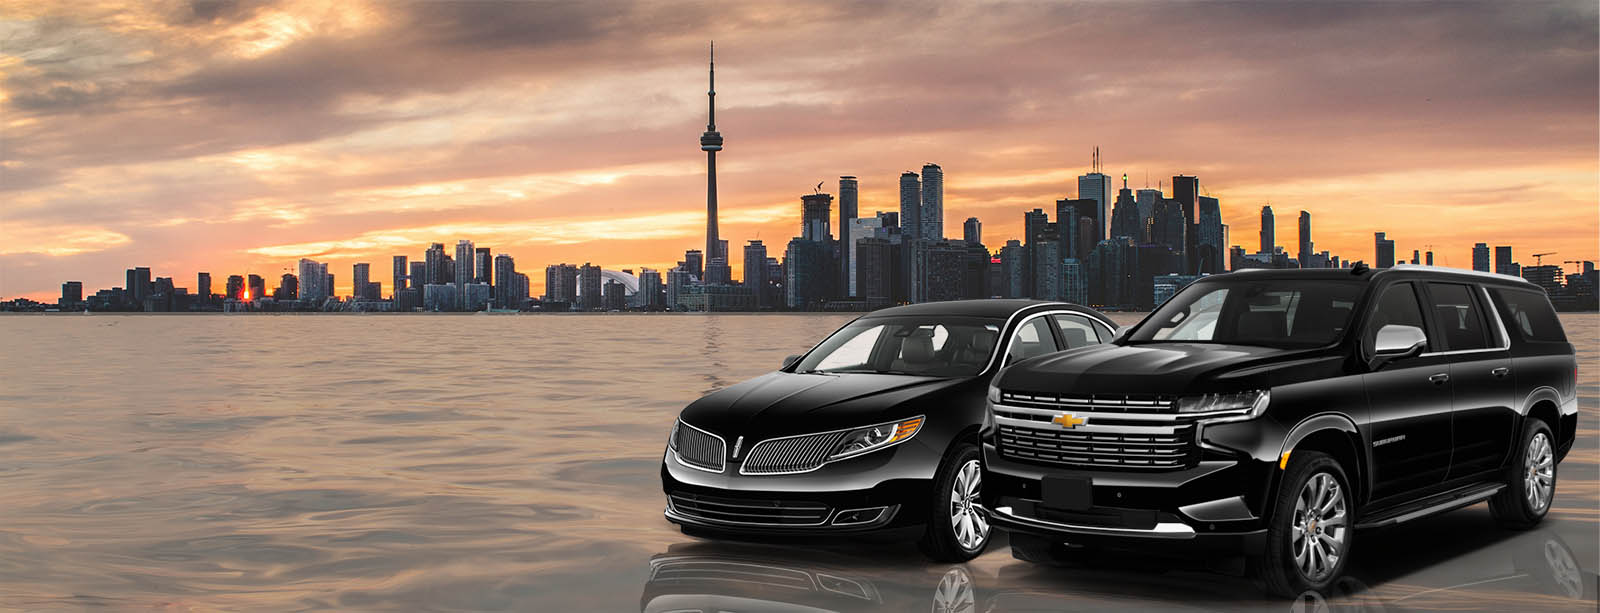 Airport Toronto Limo Services